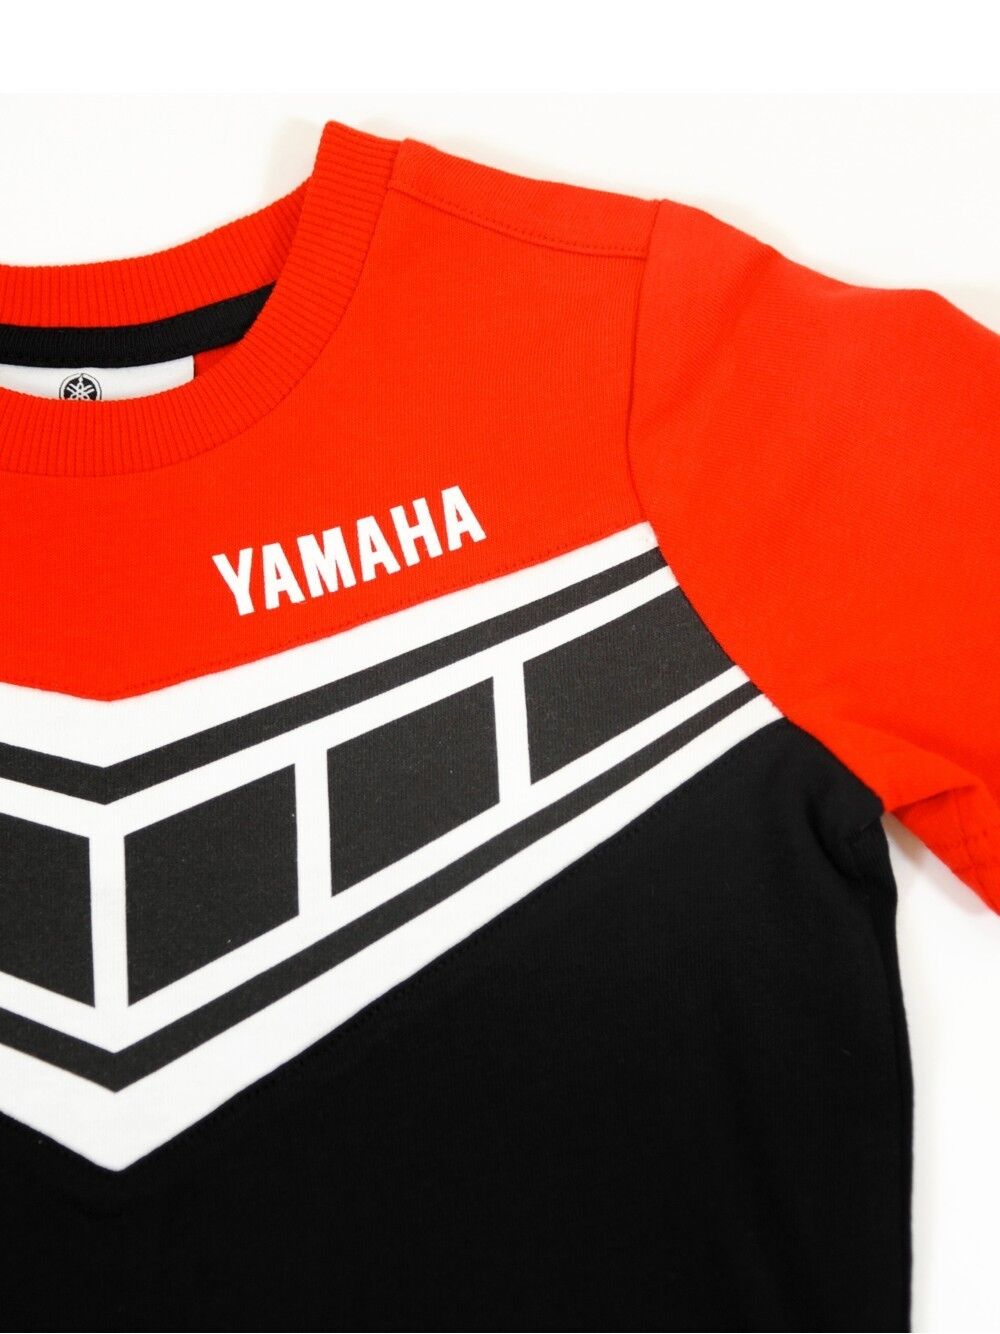 New Official Yamaha Classic Kid's T Shirt - 15 37009